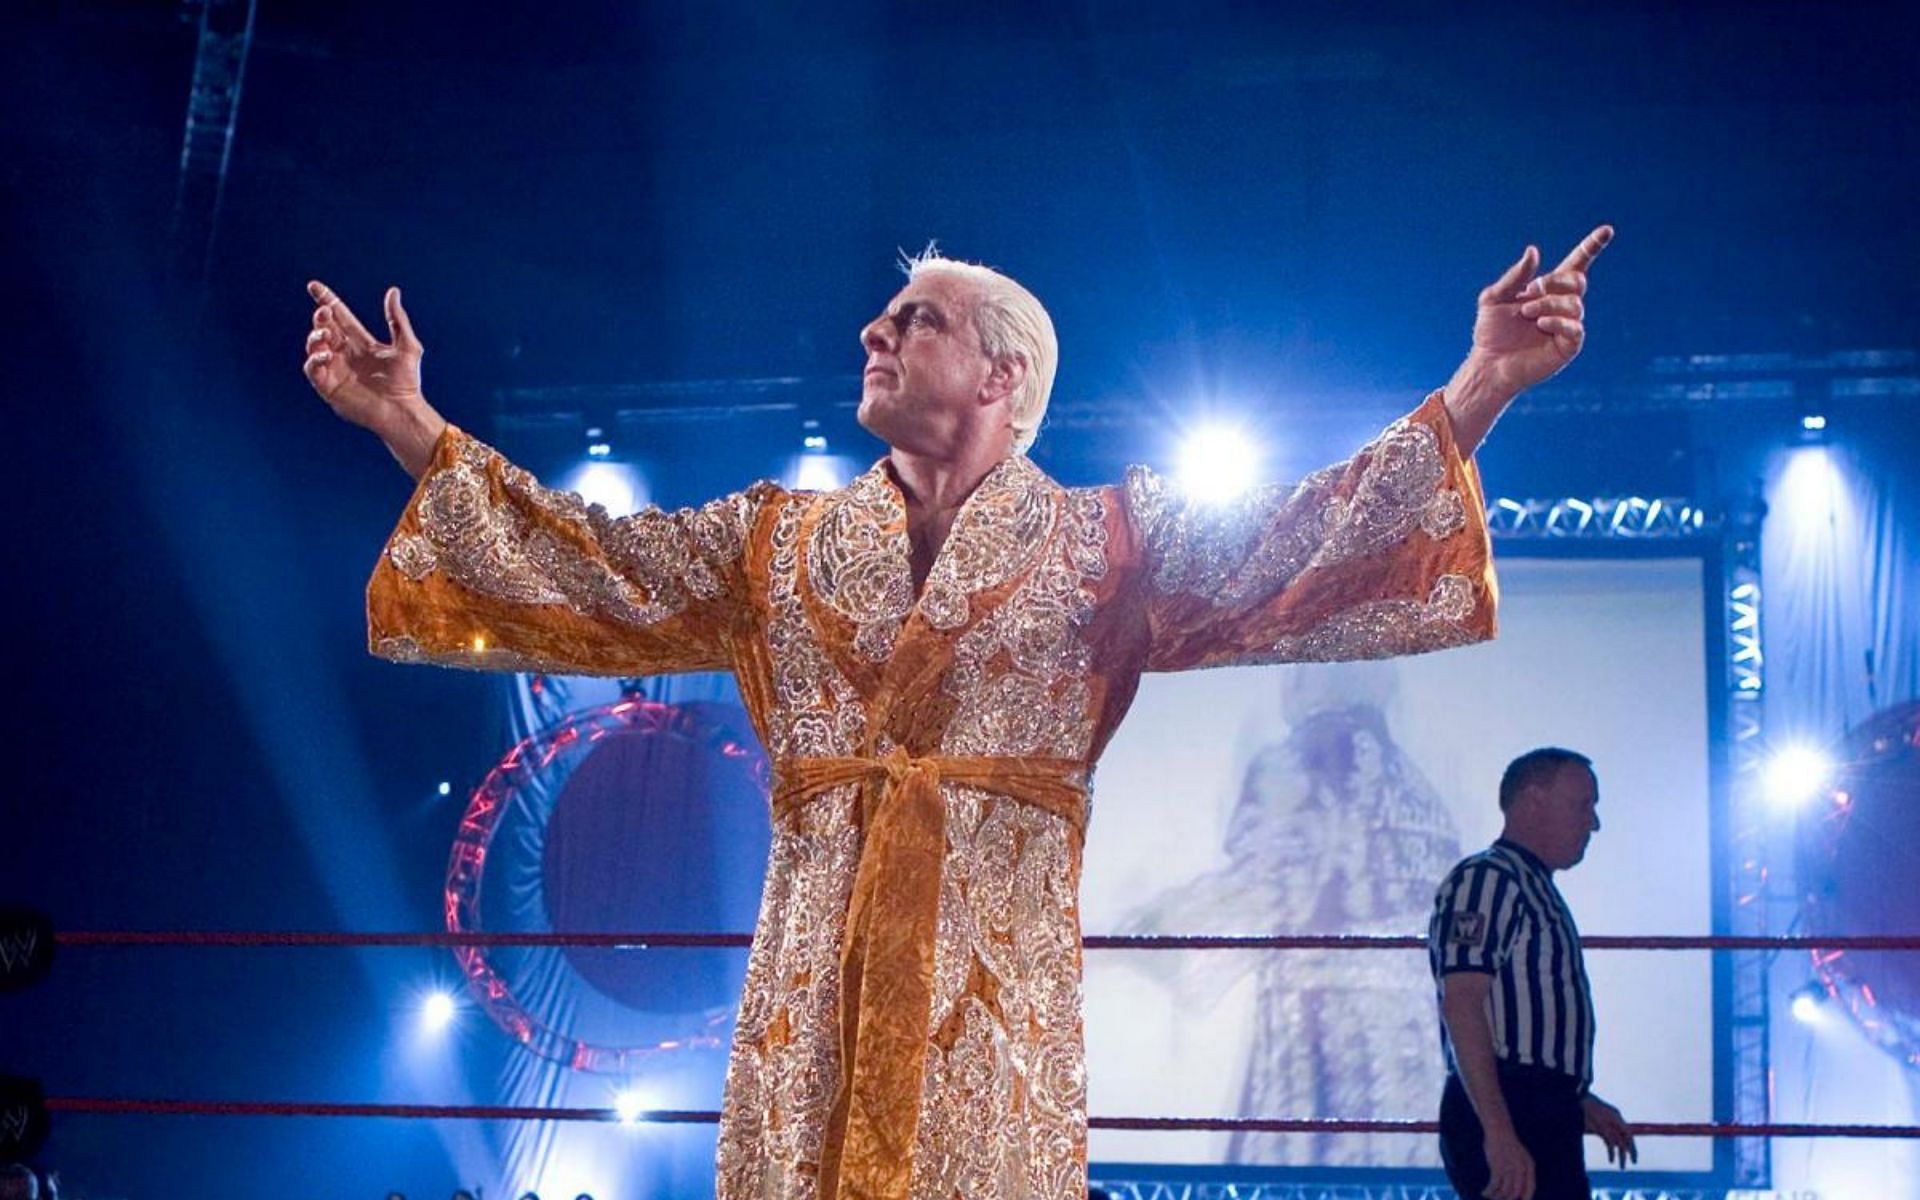 Ric Flair is a 16-time world champion